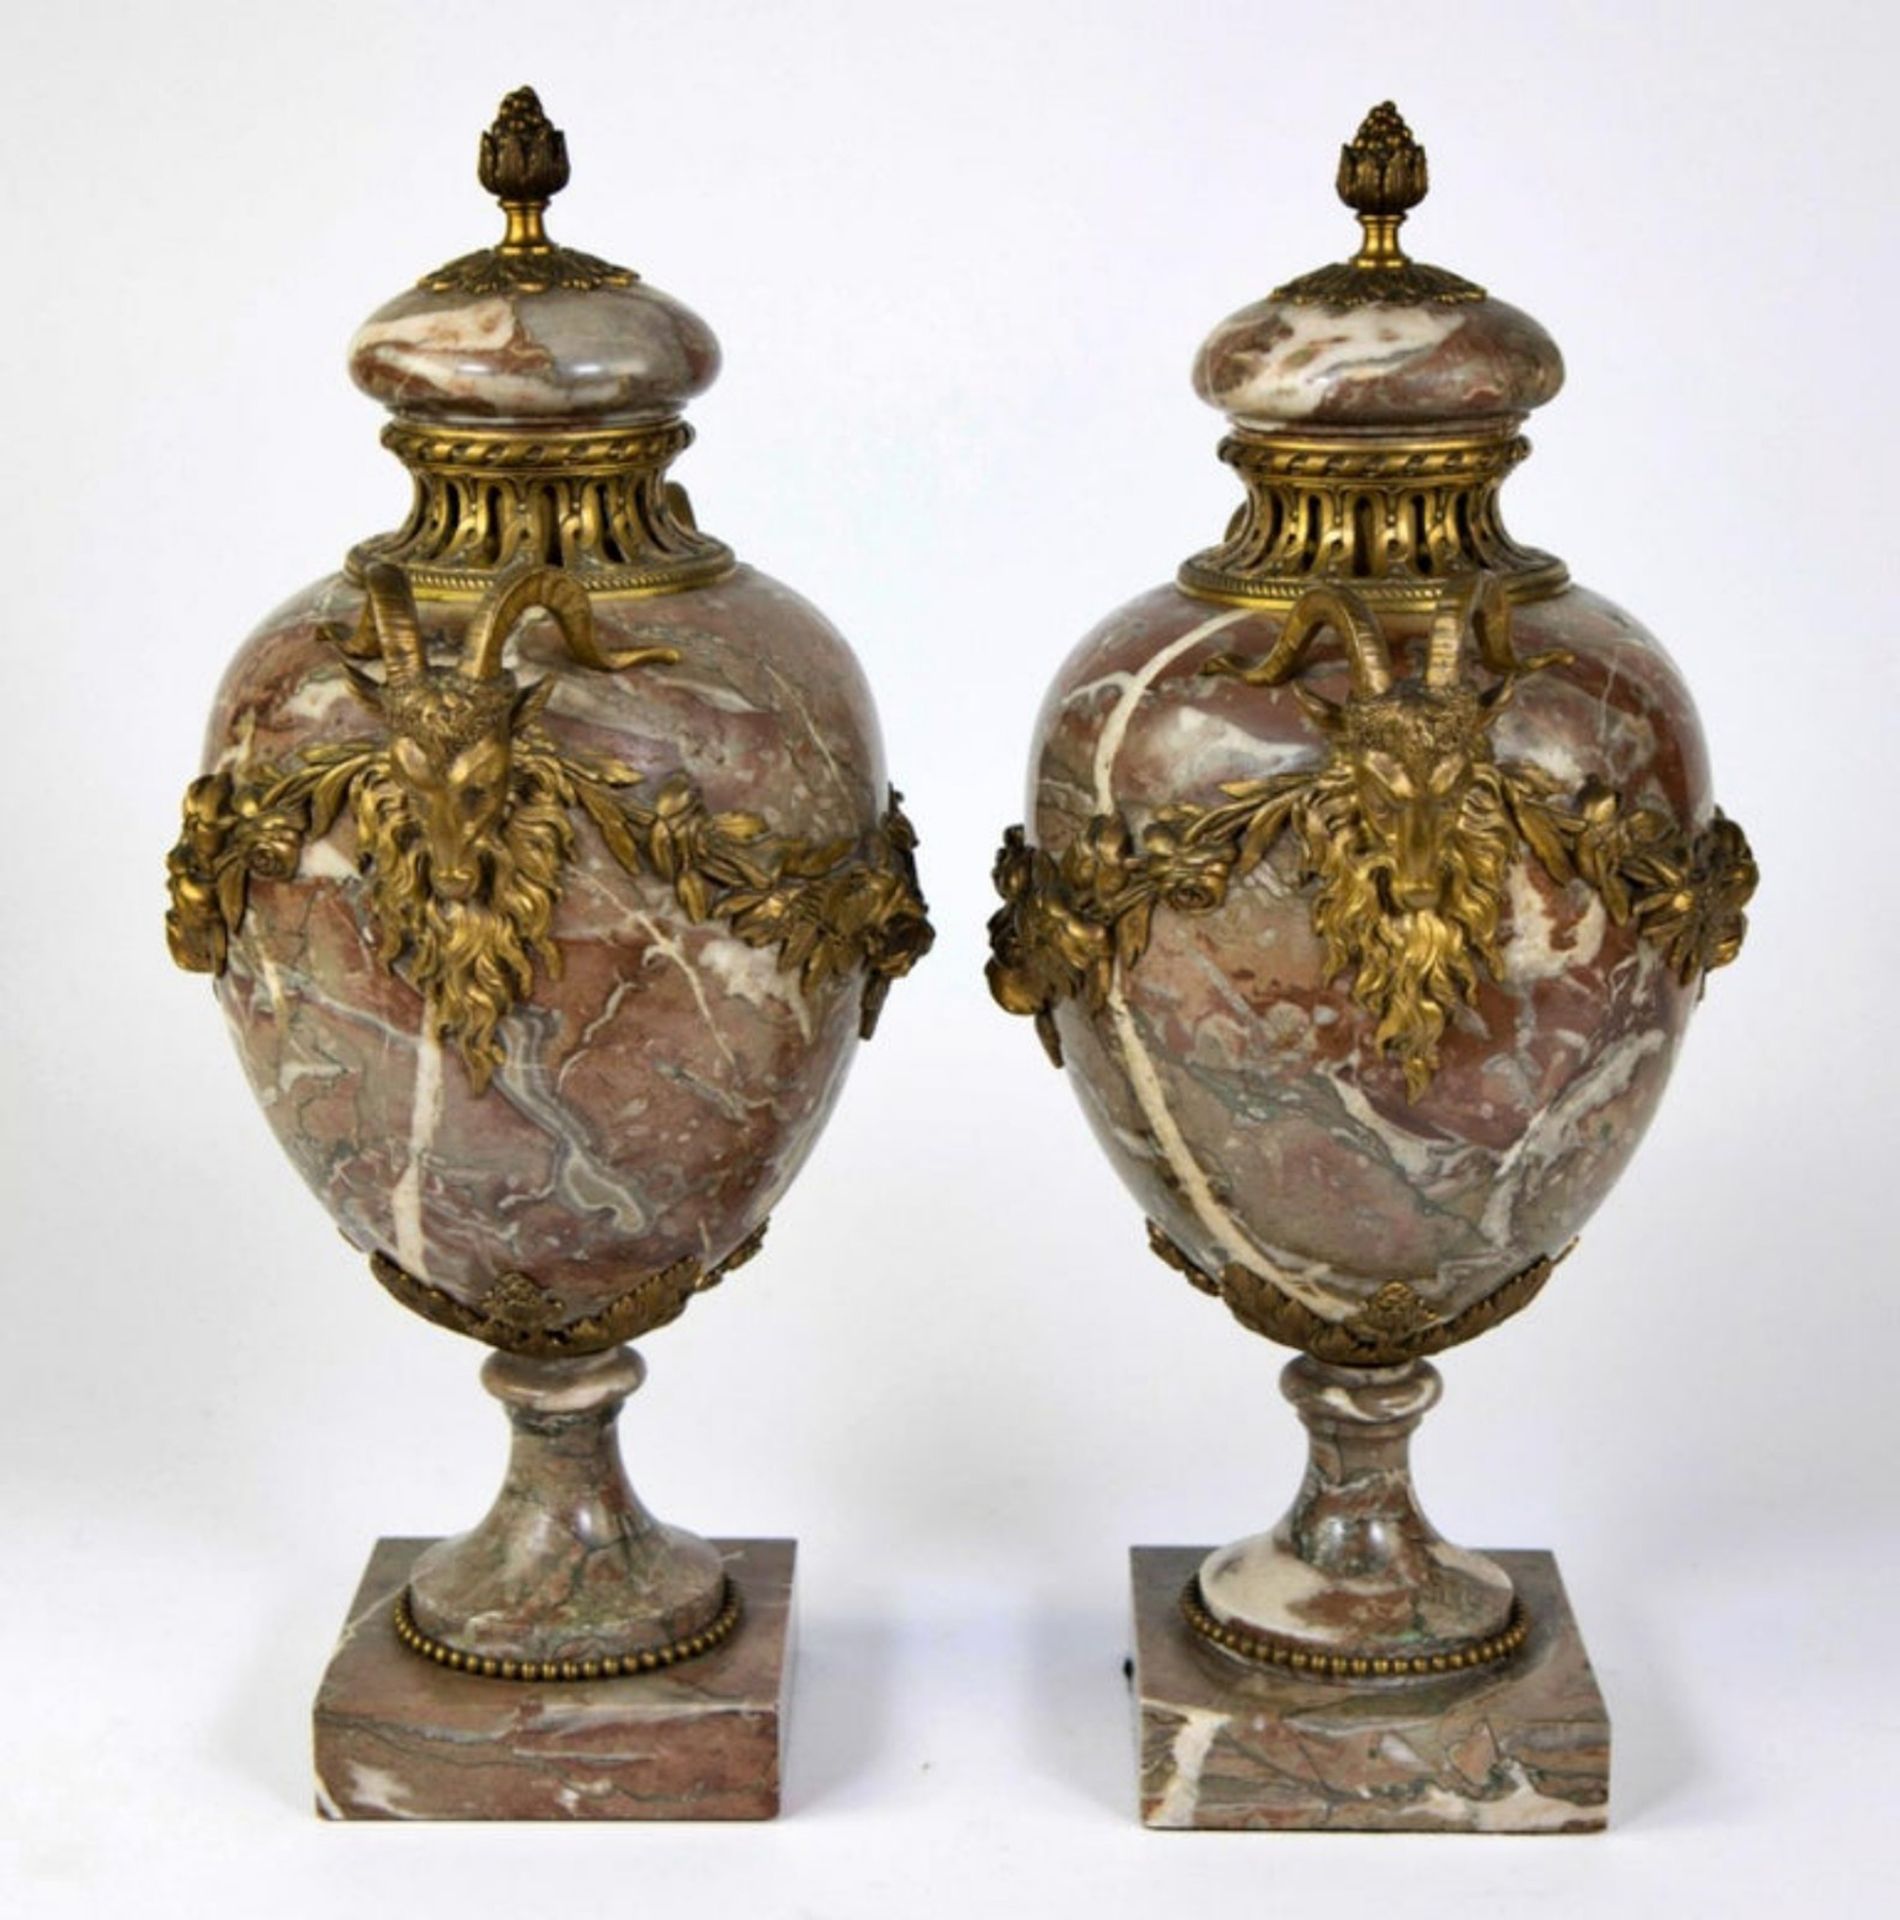 Pair of elegant French censer vases from the 19th century - Image 3 of 3